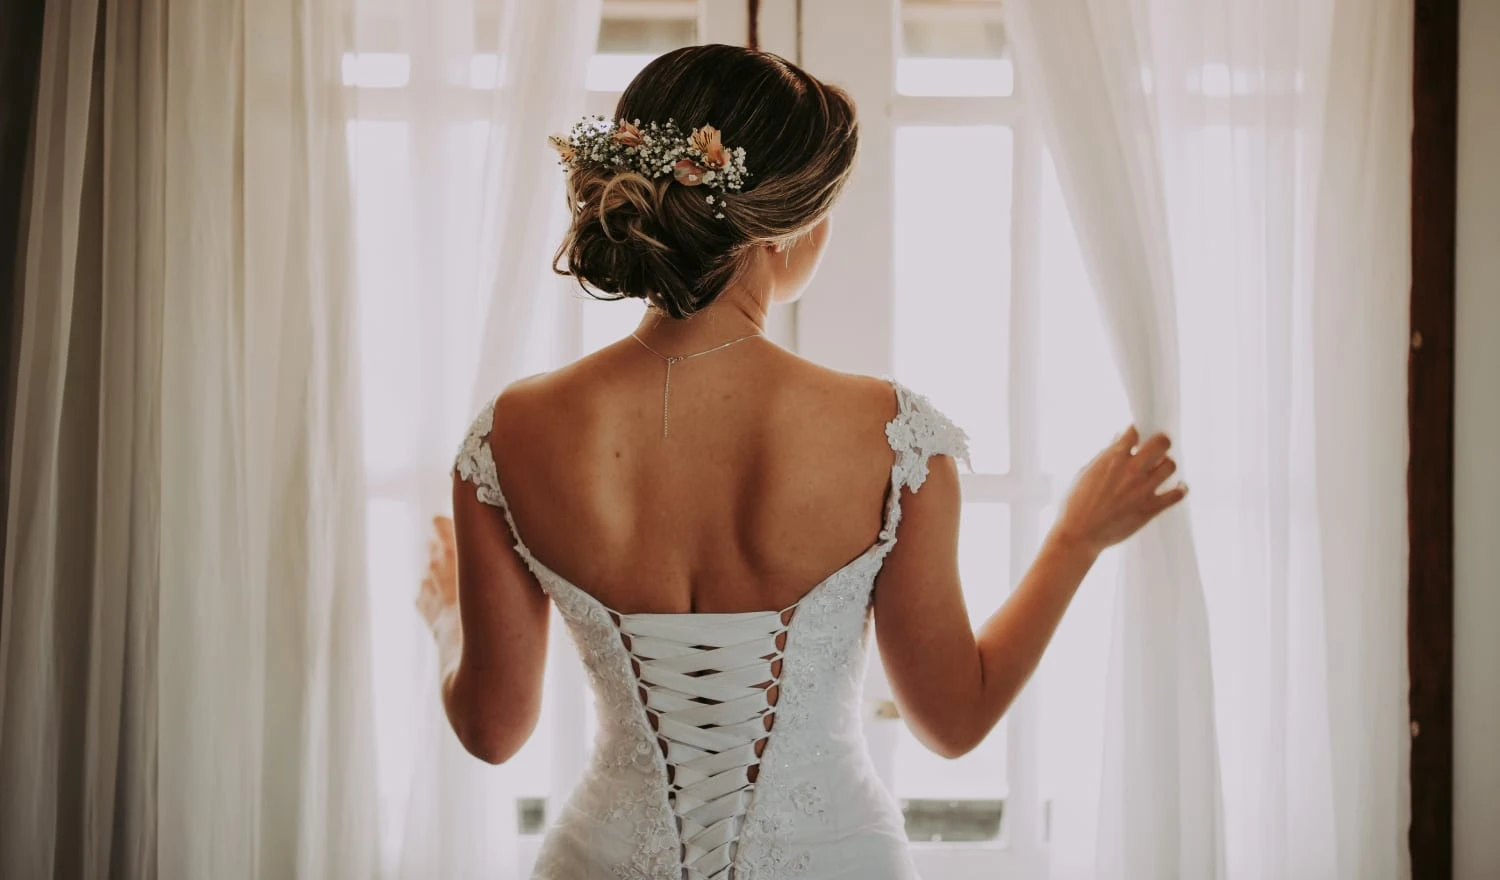 A bride looking looking out through curtains